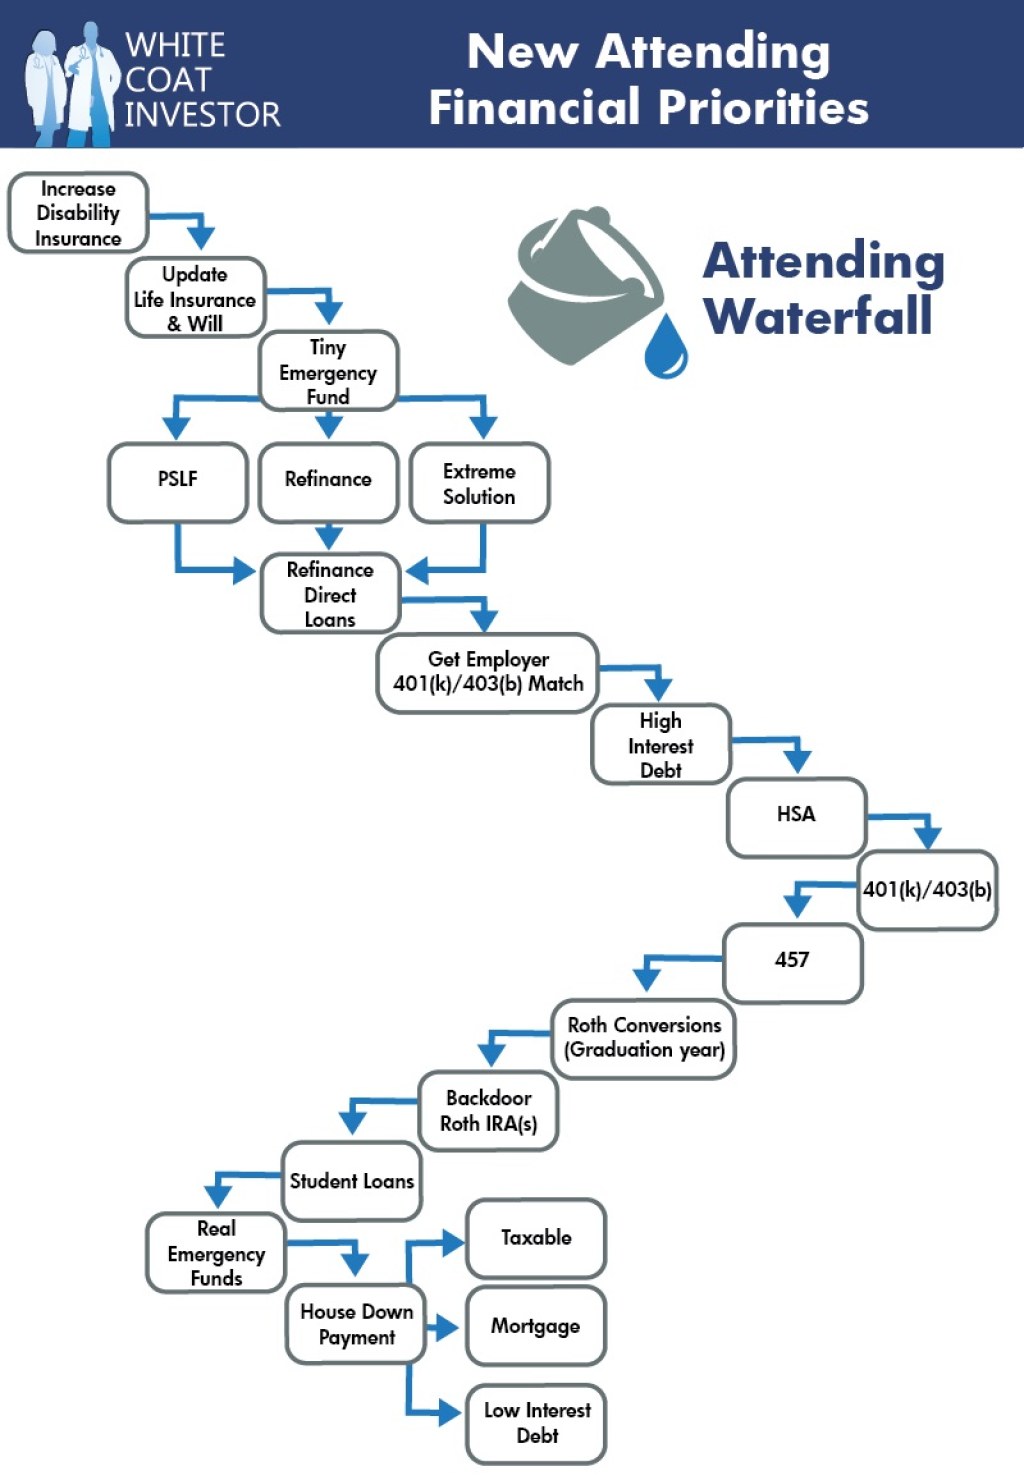 personal finance waterfall - Money Waterfalls for New Residents & Attendings  White Coat Investor